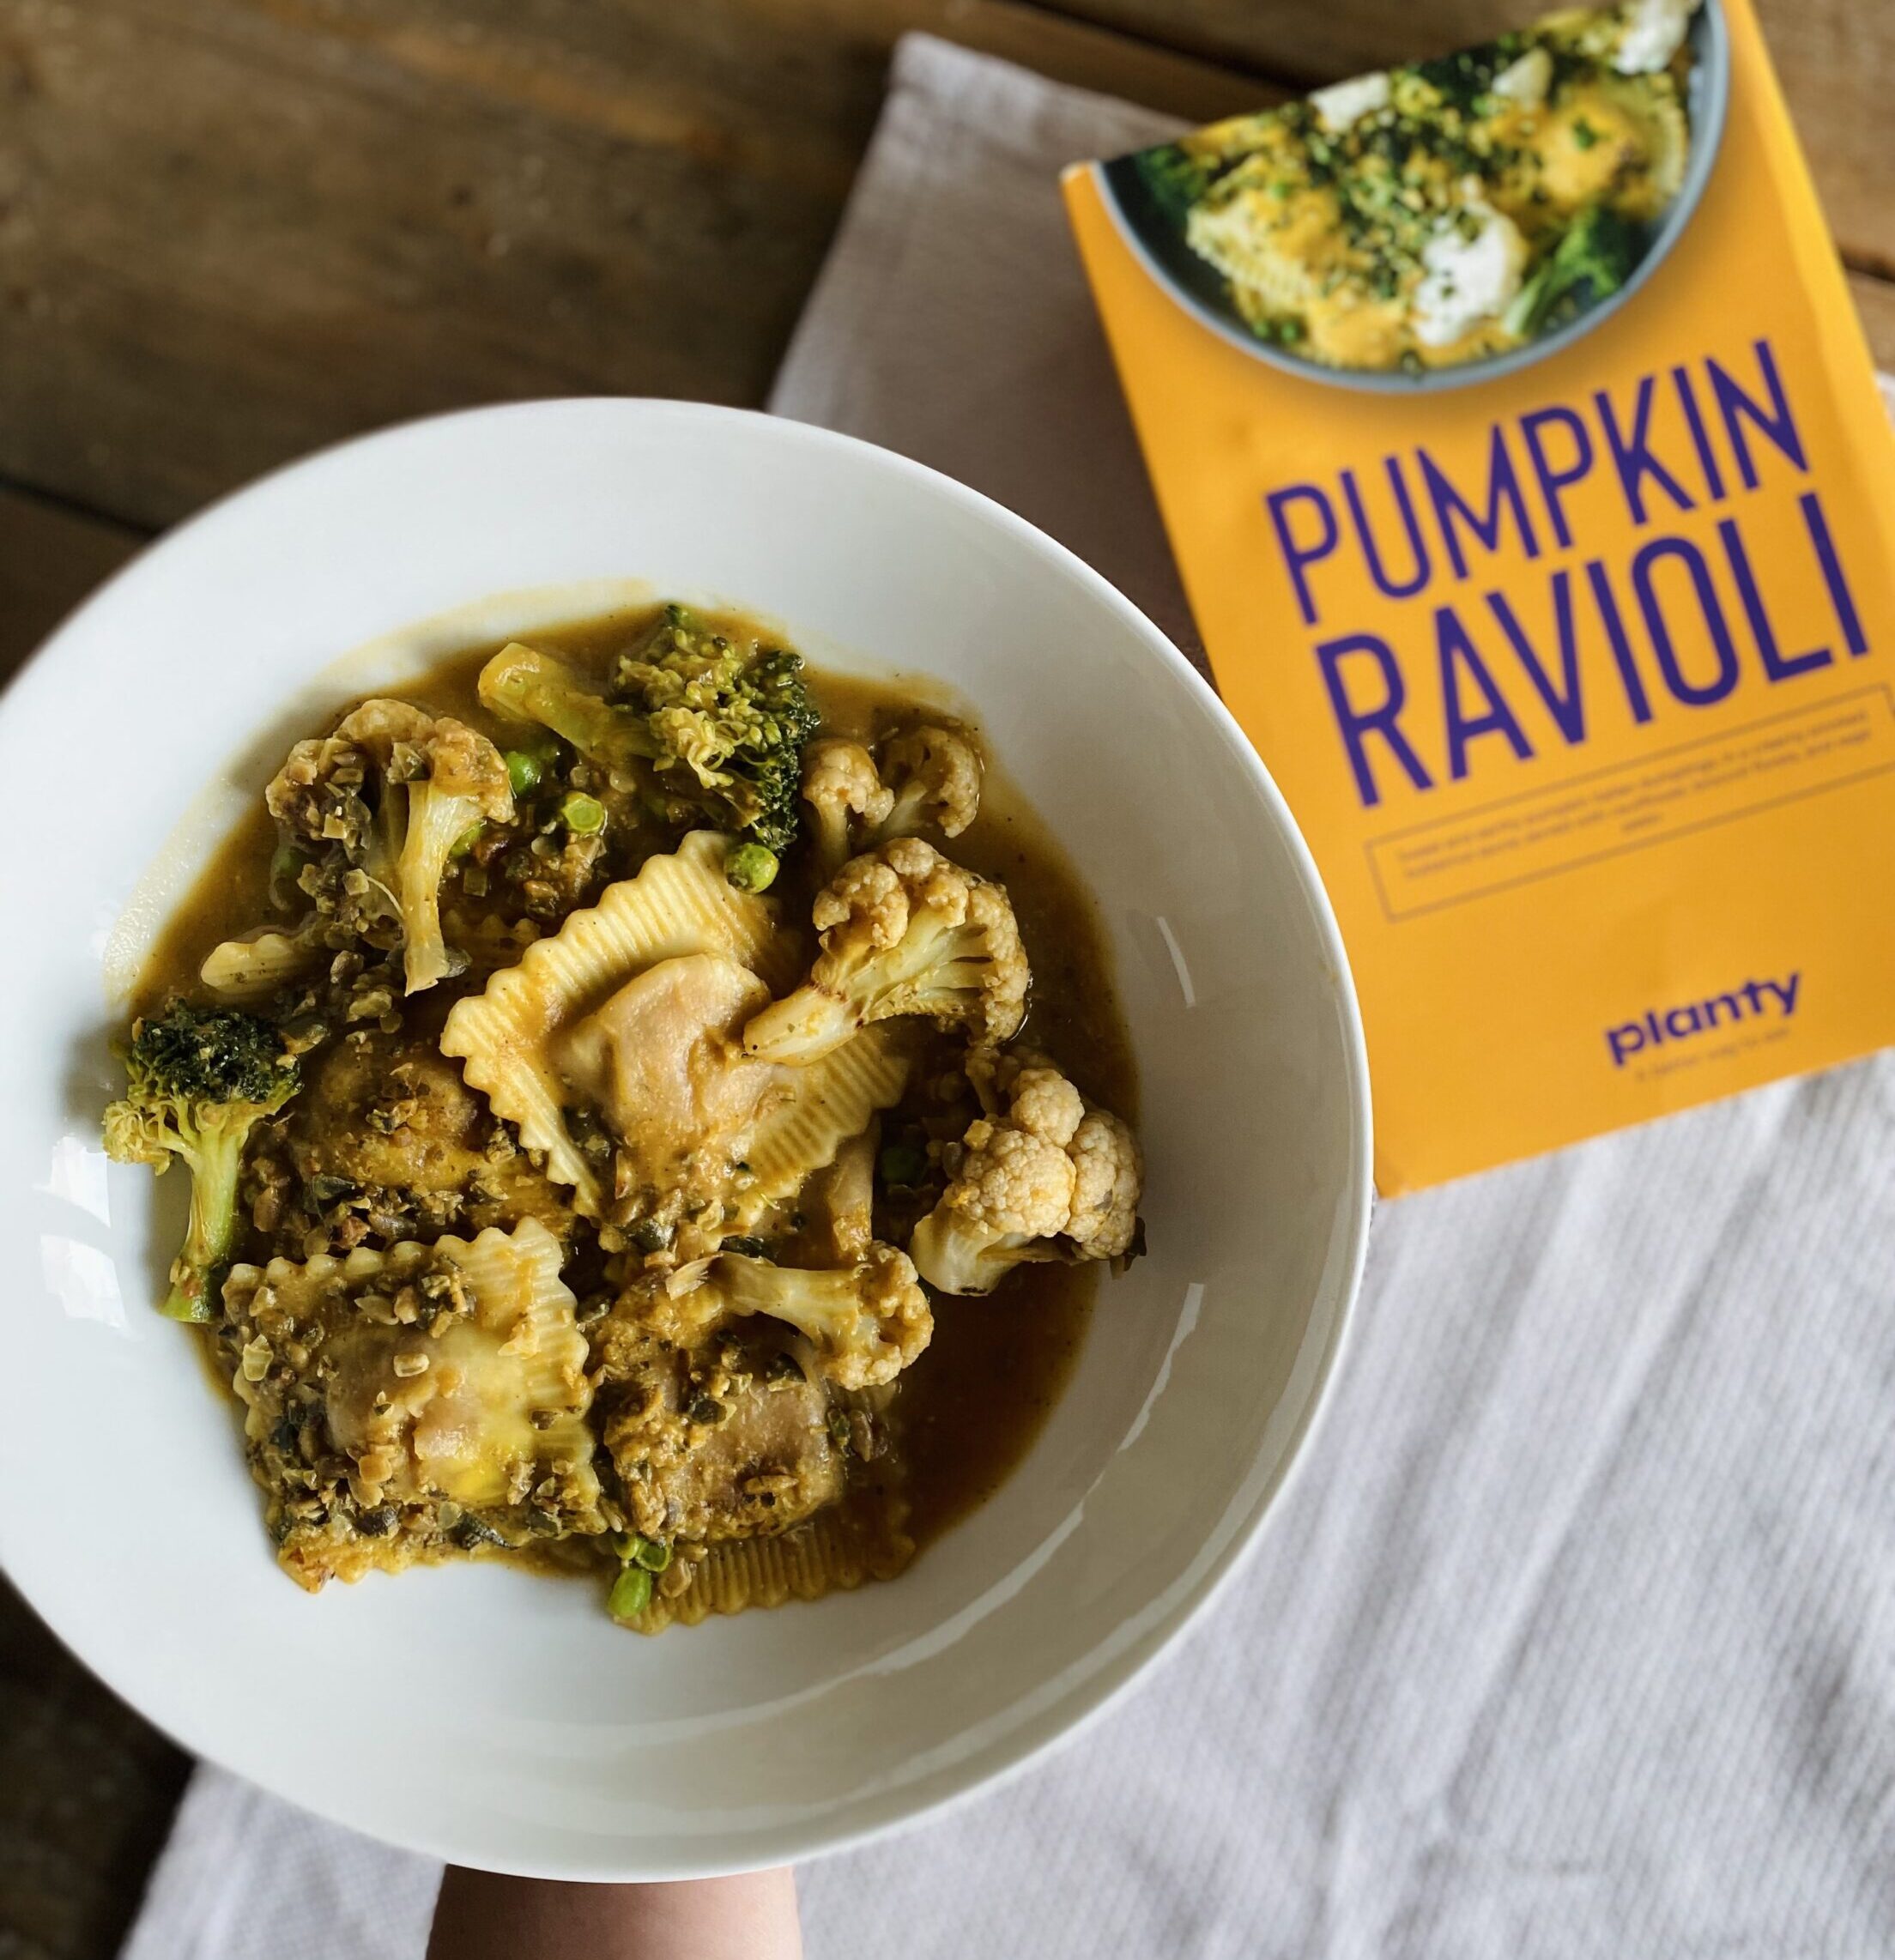 A close up of the pumpkin ravioli dish by Planty that I reviewed